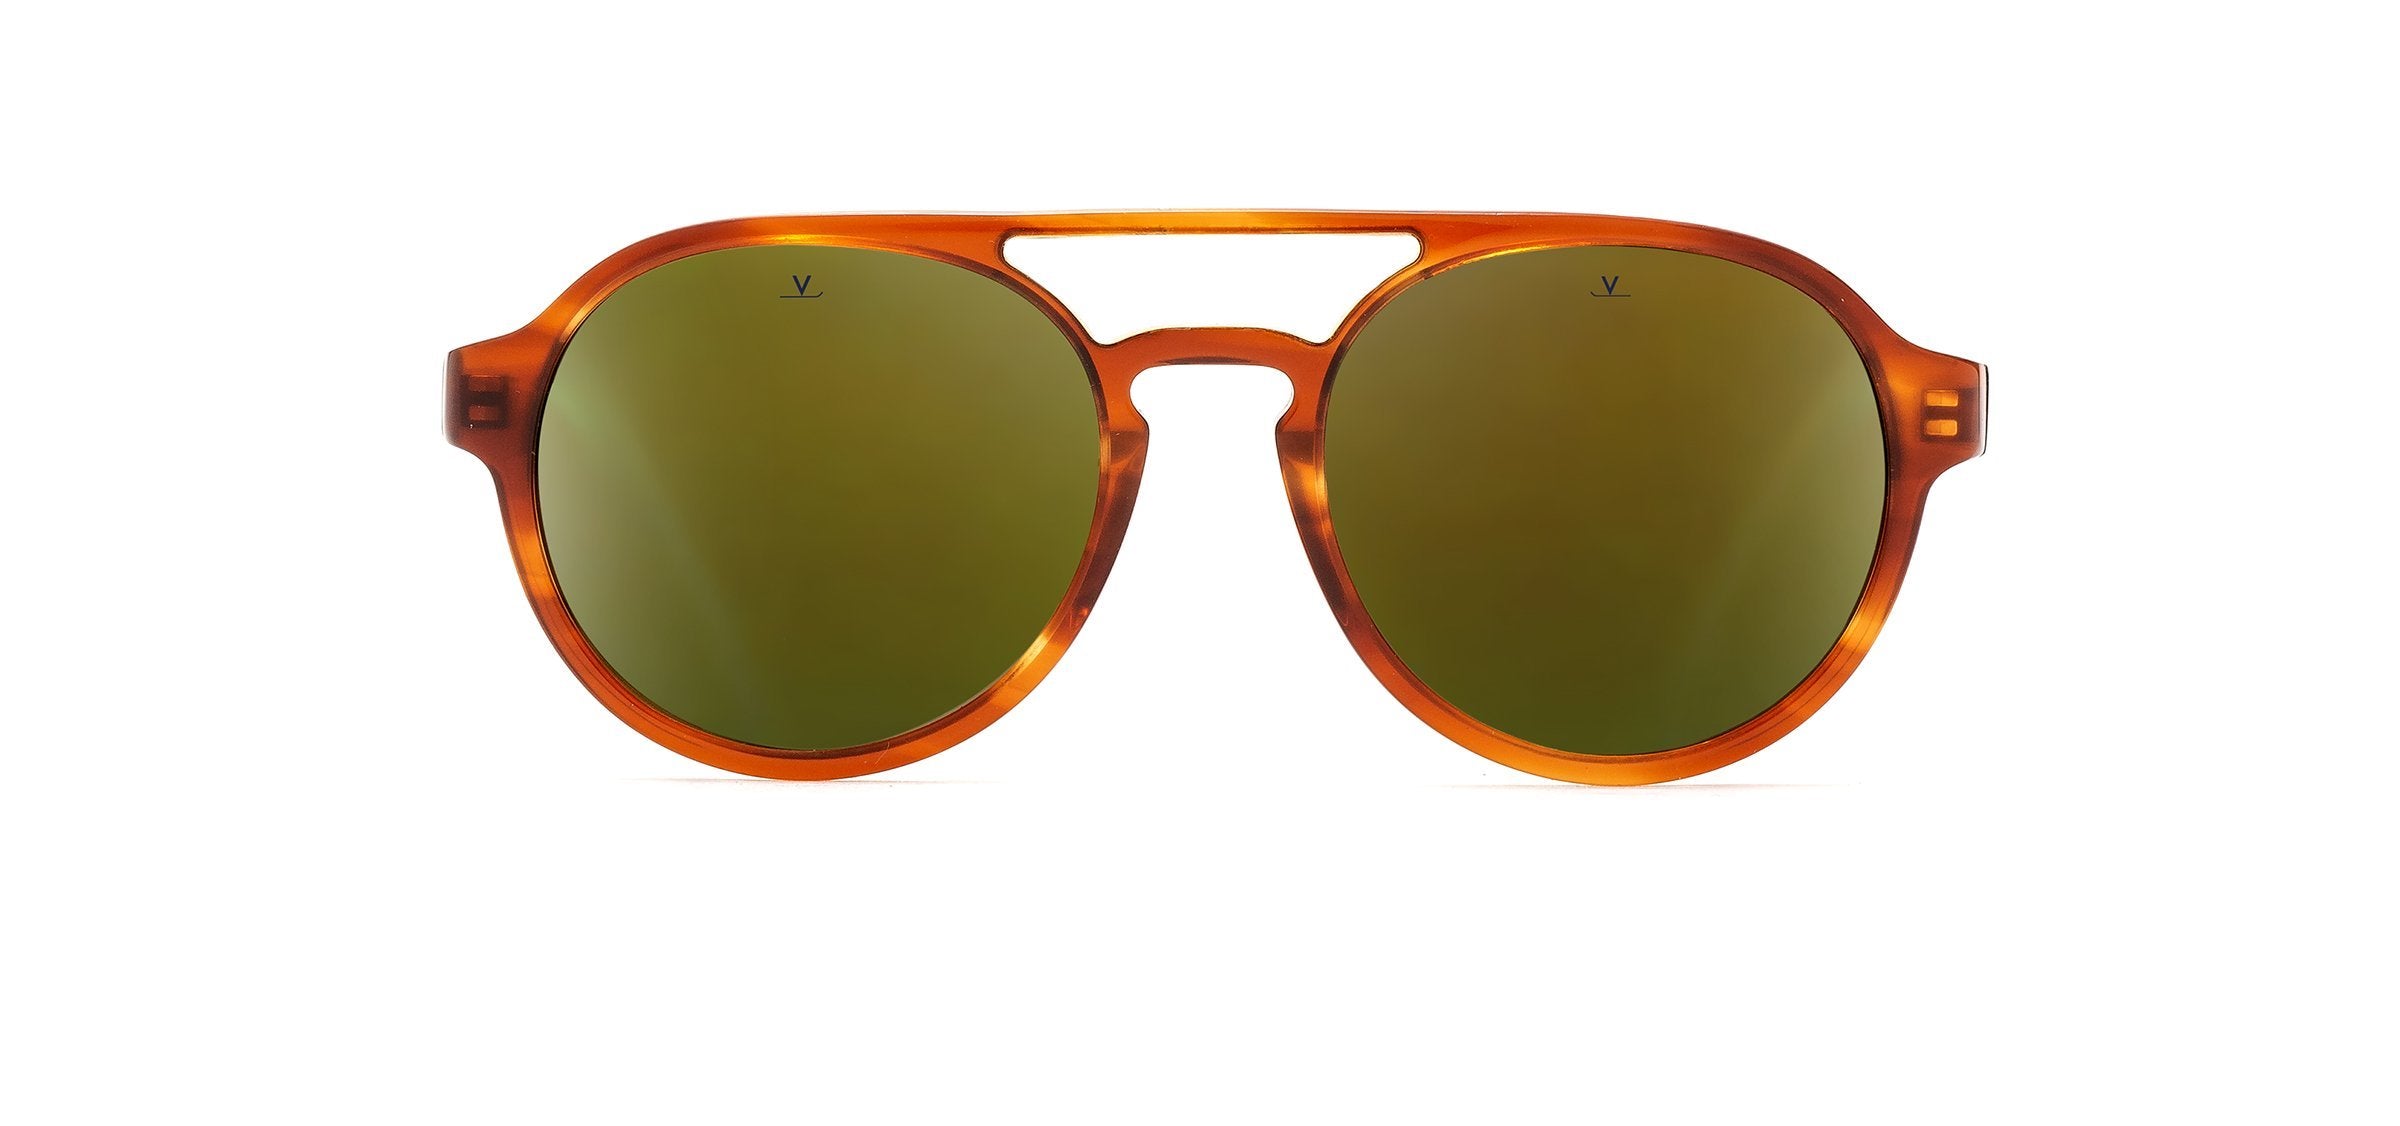 Color_VL190900021128 - DISTRICT 1909 Tortoise (honey tortoise) / Pure Grey Green Flashed